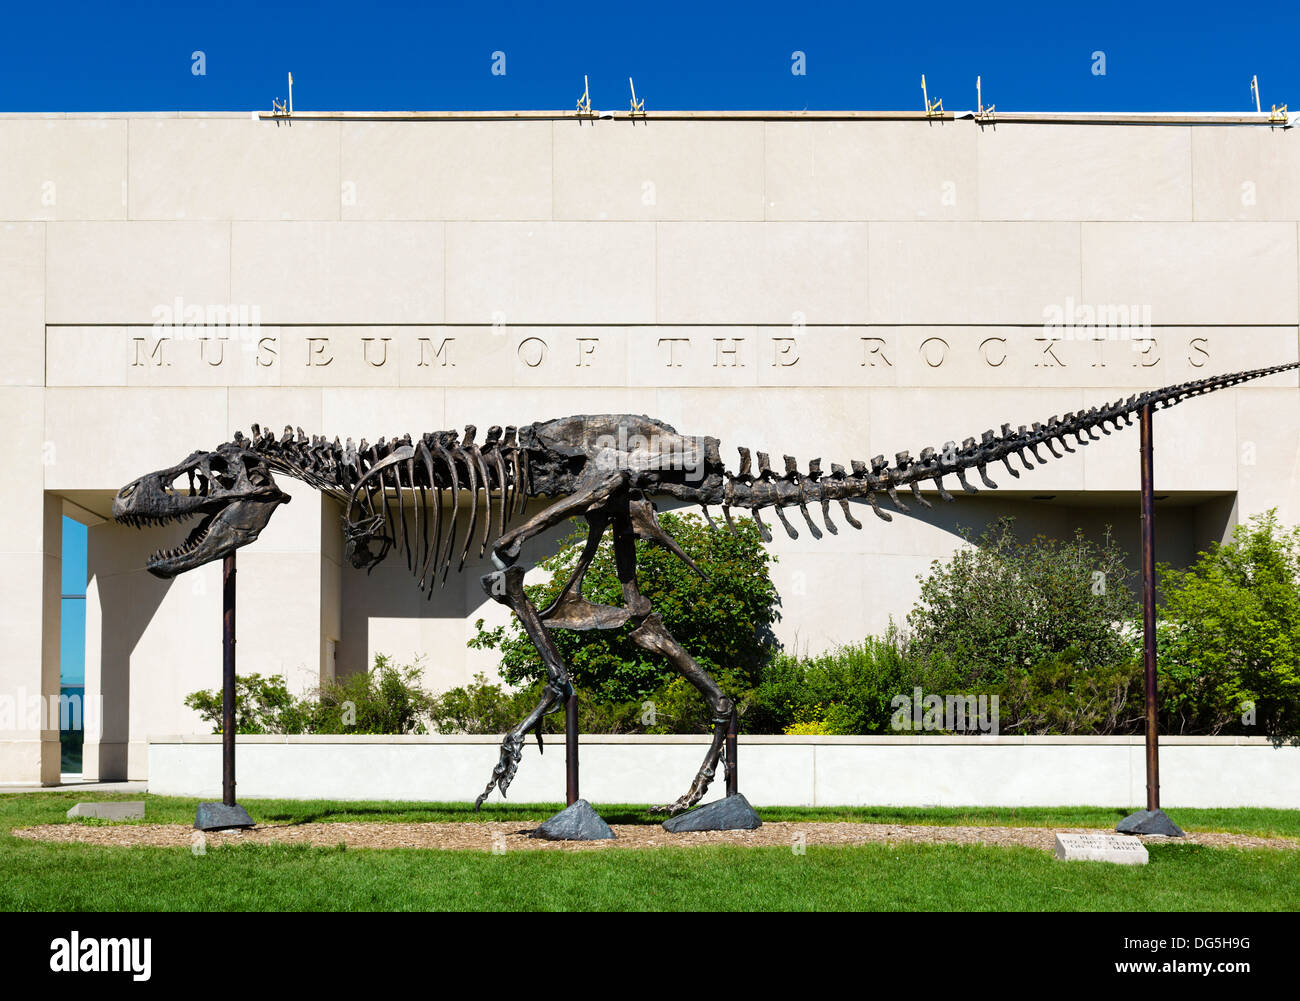 T-Rex in front of the Museum of the Rockies, Bozeman, Montana, USA Stock Photo